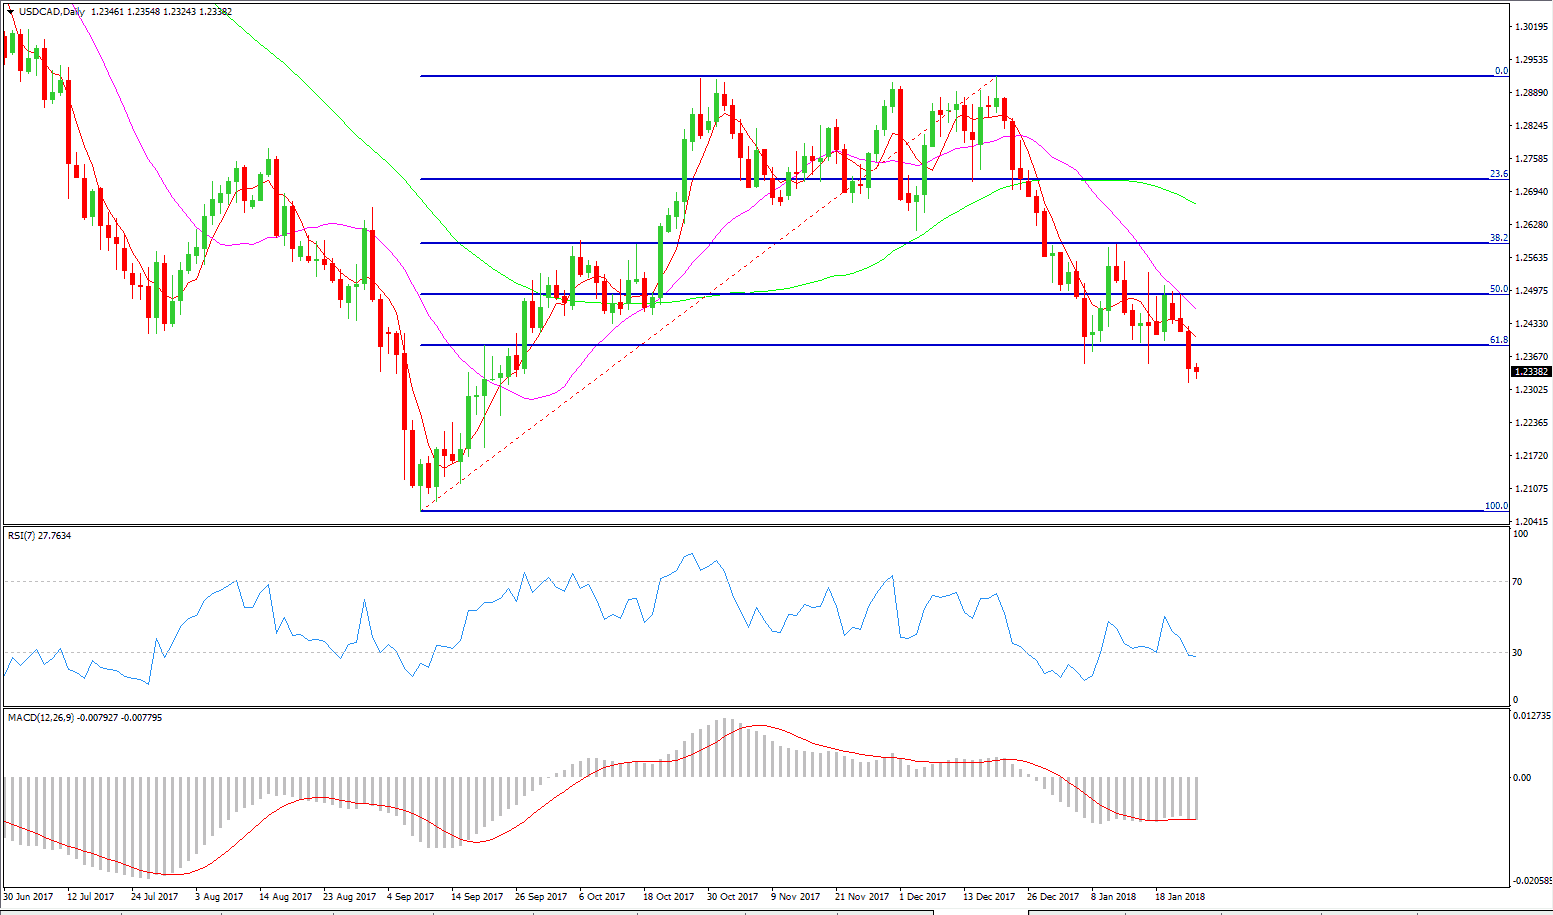 USDCAD Failed to Rally with 61.8% Retracement’s Support